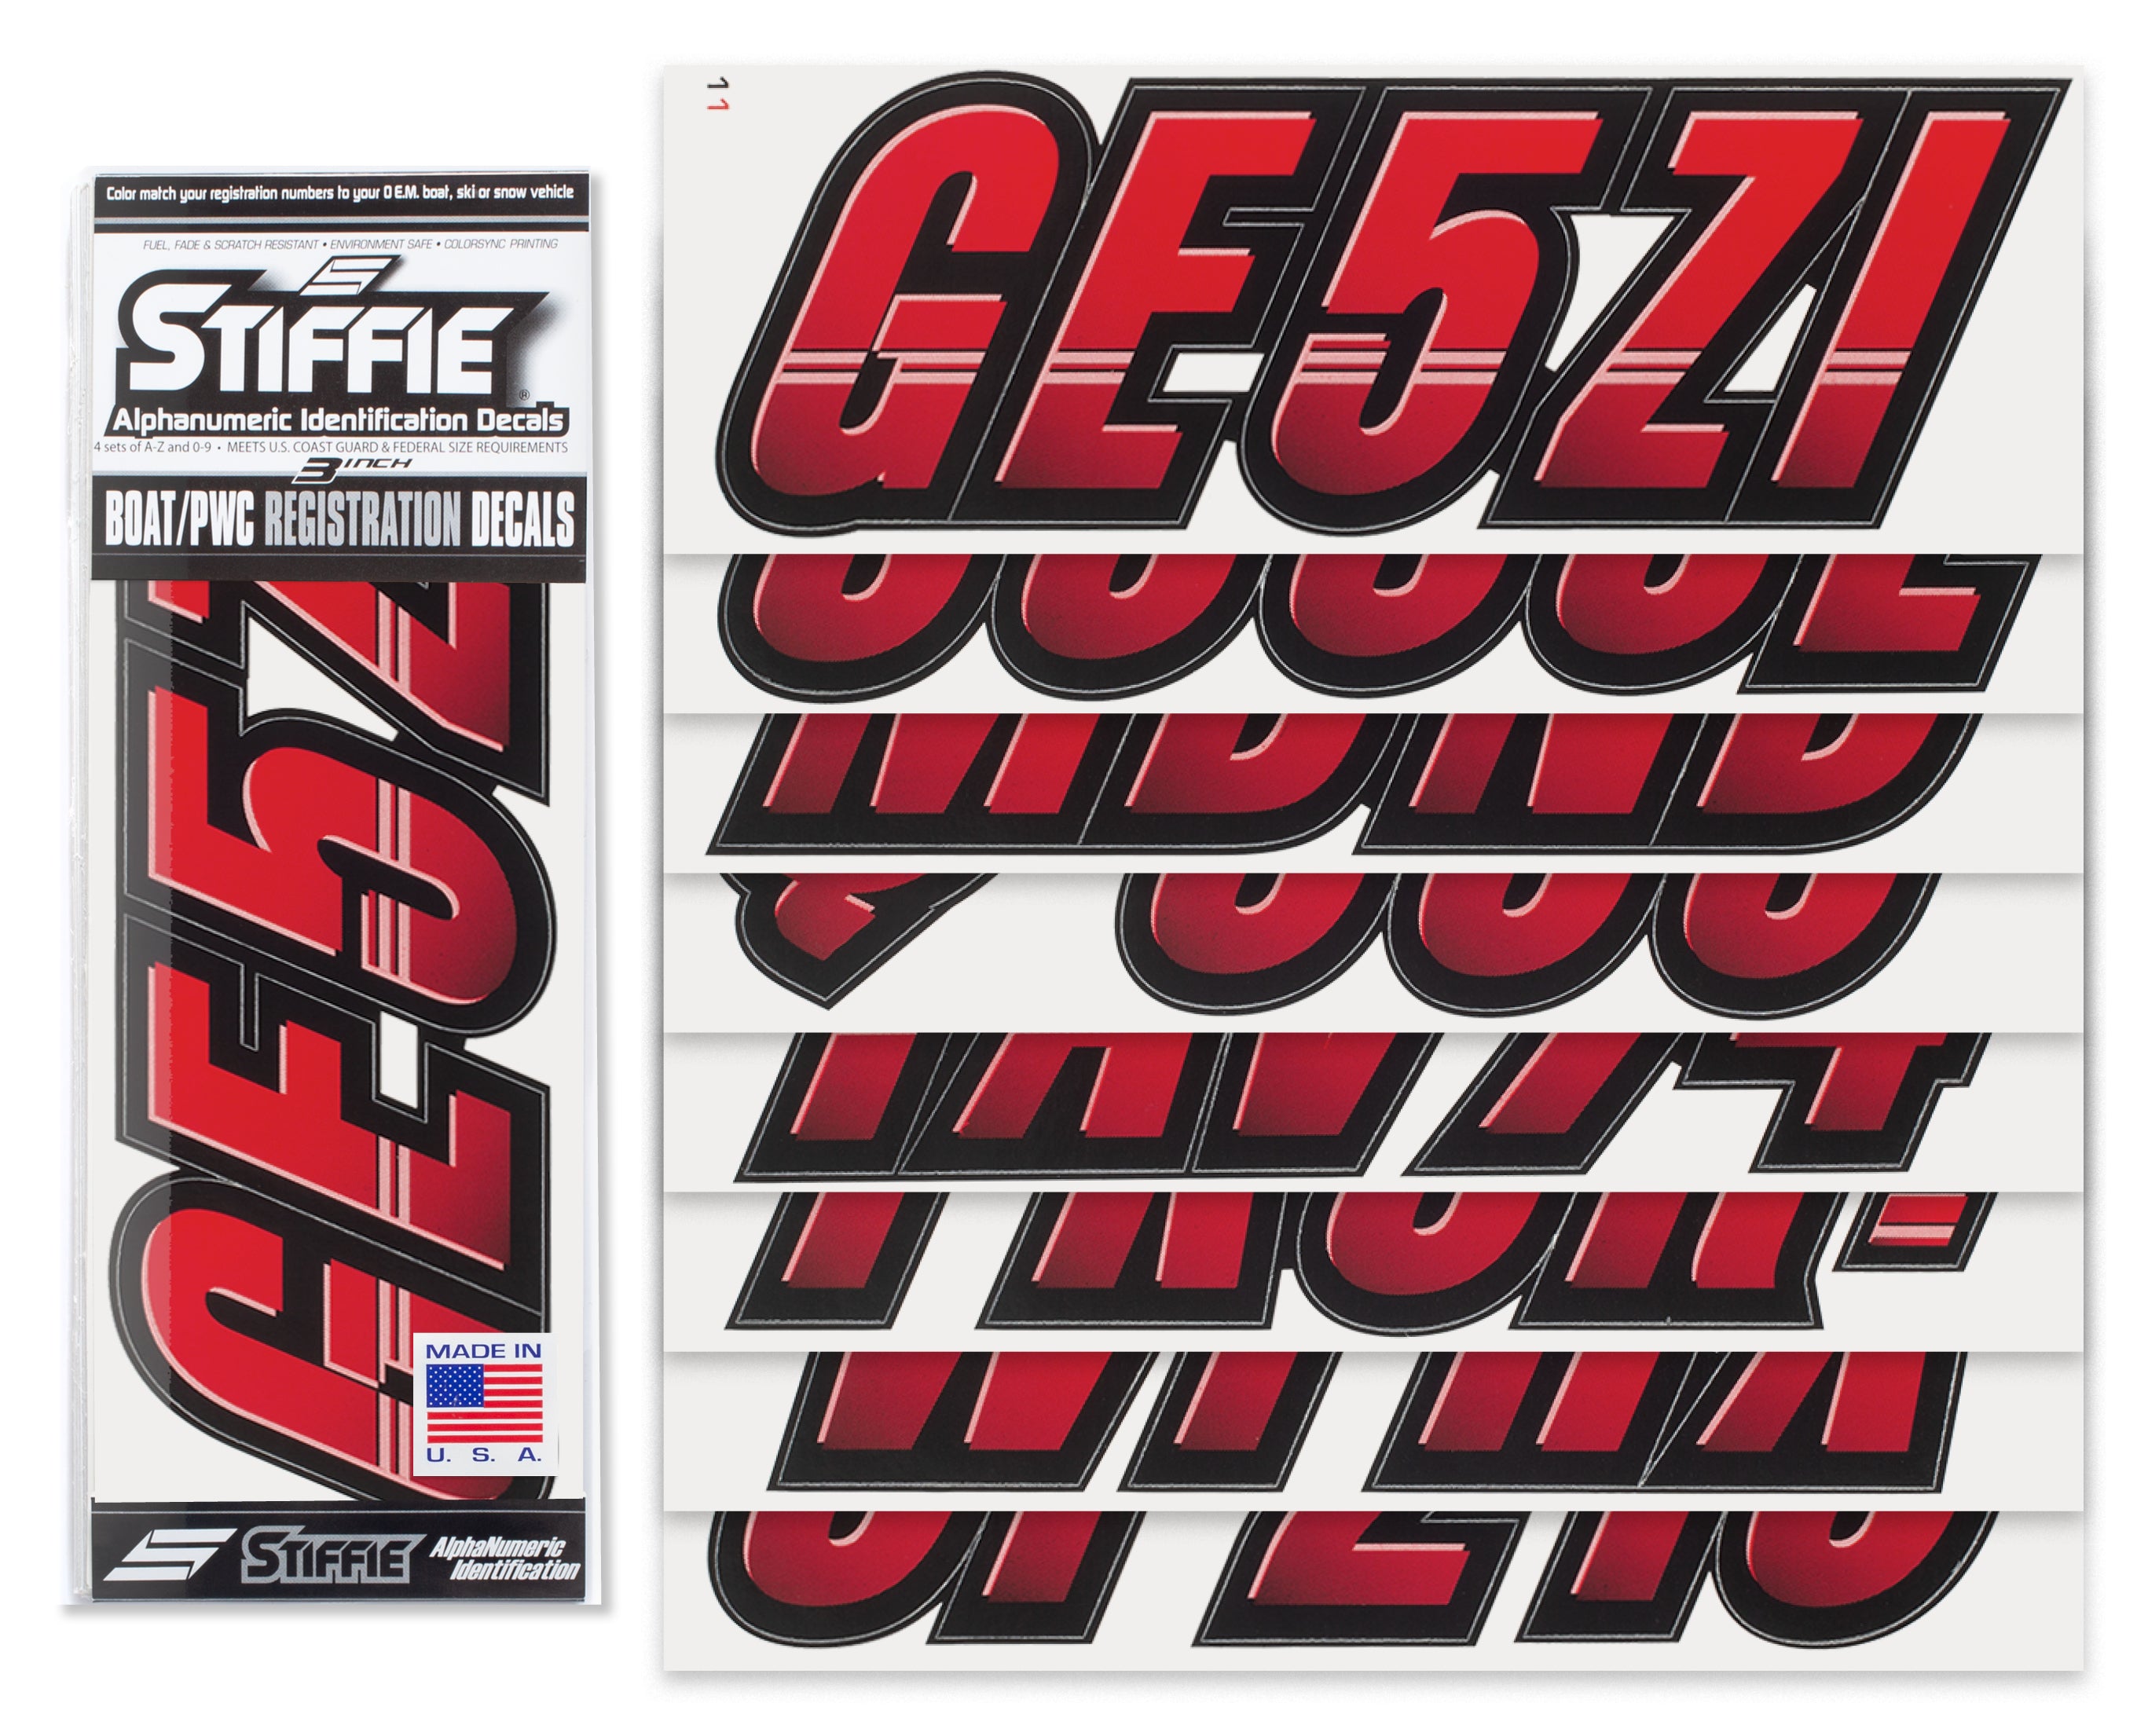 Stiffie Techtron Red/Black 3" Alpha-Numeric Registration Identification Numbers Stickers Decals for Boats & Personal Watercraft